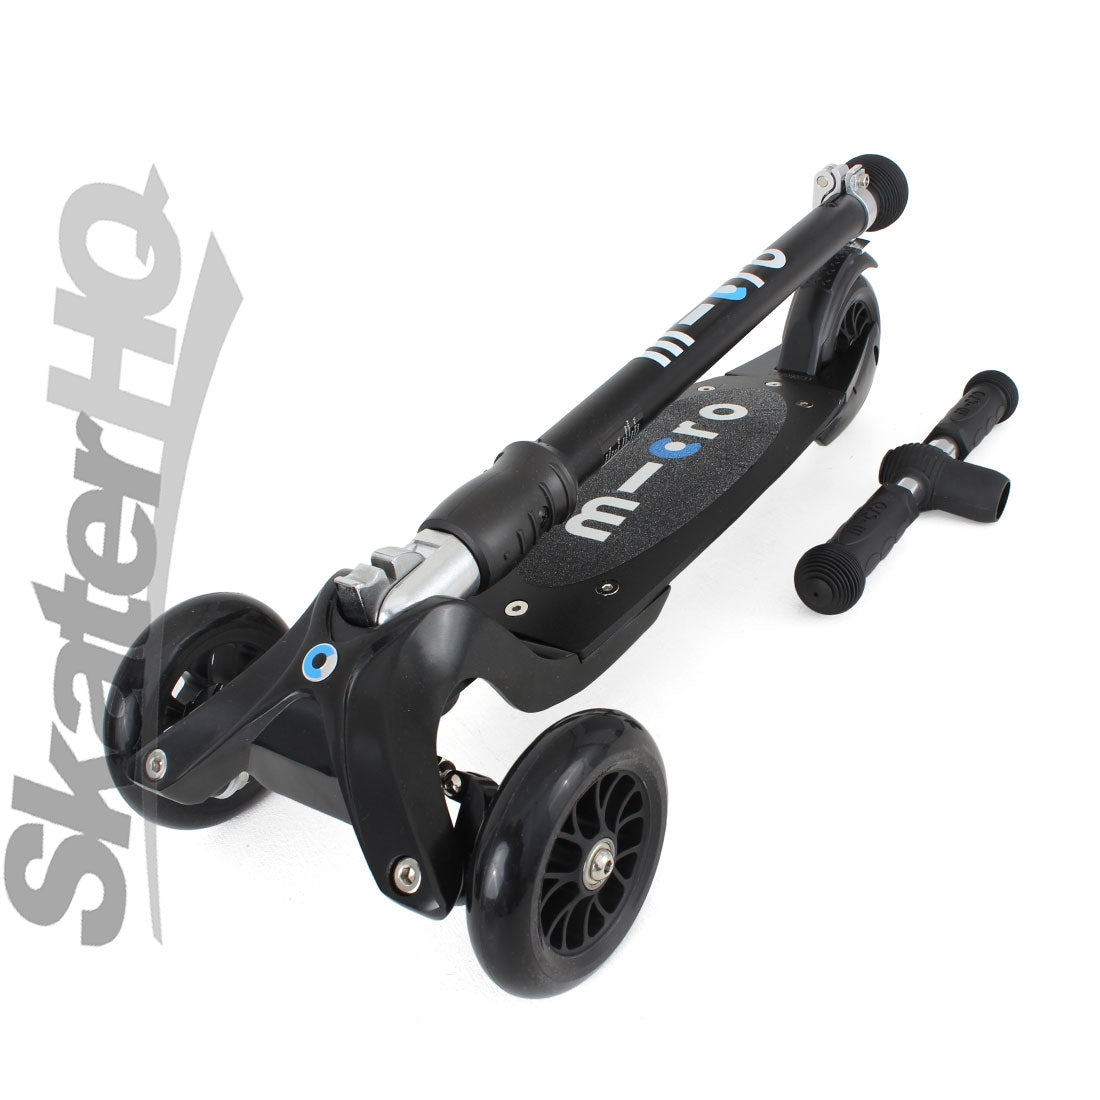 Micro Kickboard Compact J/T - Black Scooter Completes Rec